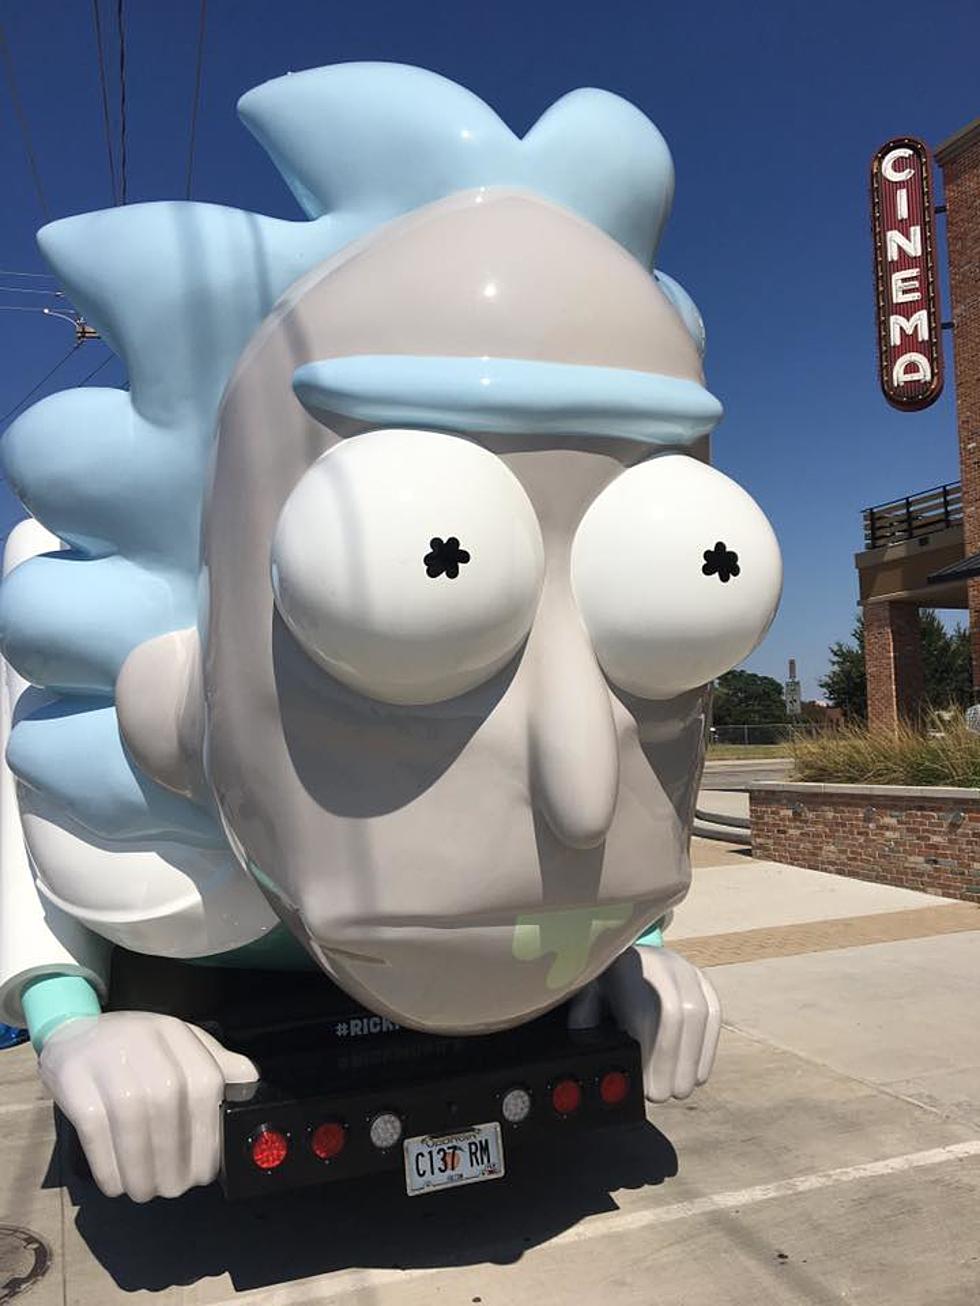 Rick and Morty Rickmobile Making Stops Across Texas With Sweet Official Merch